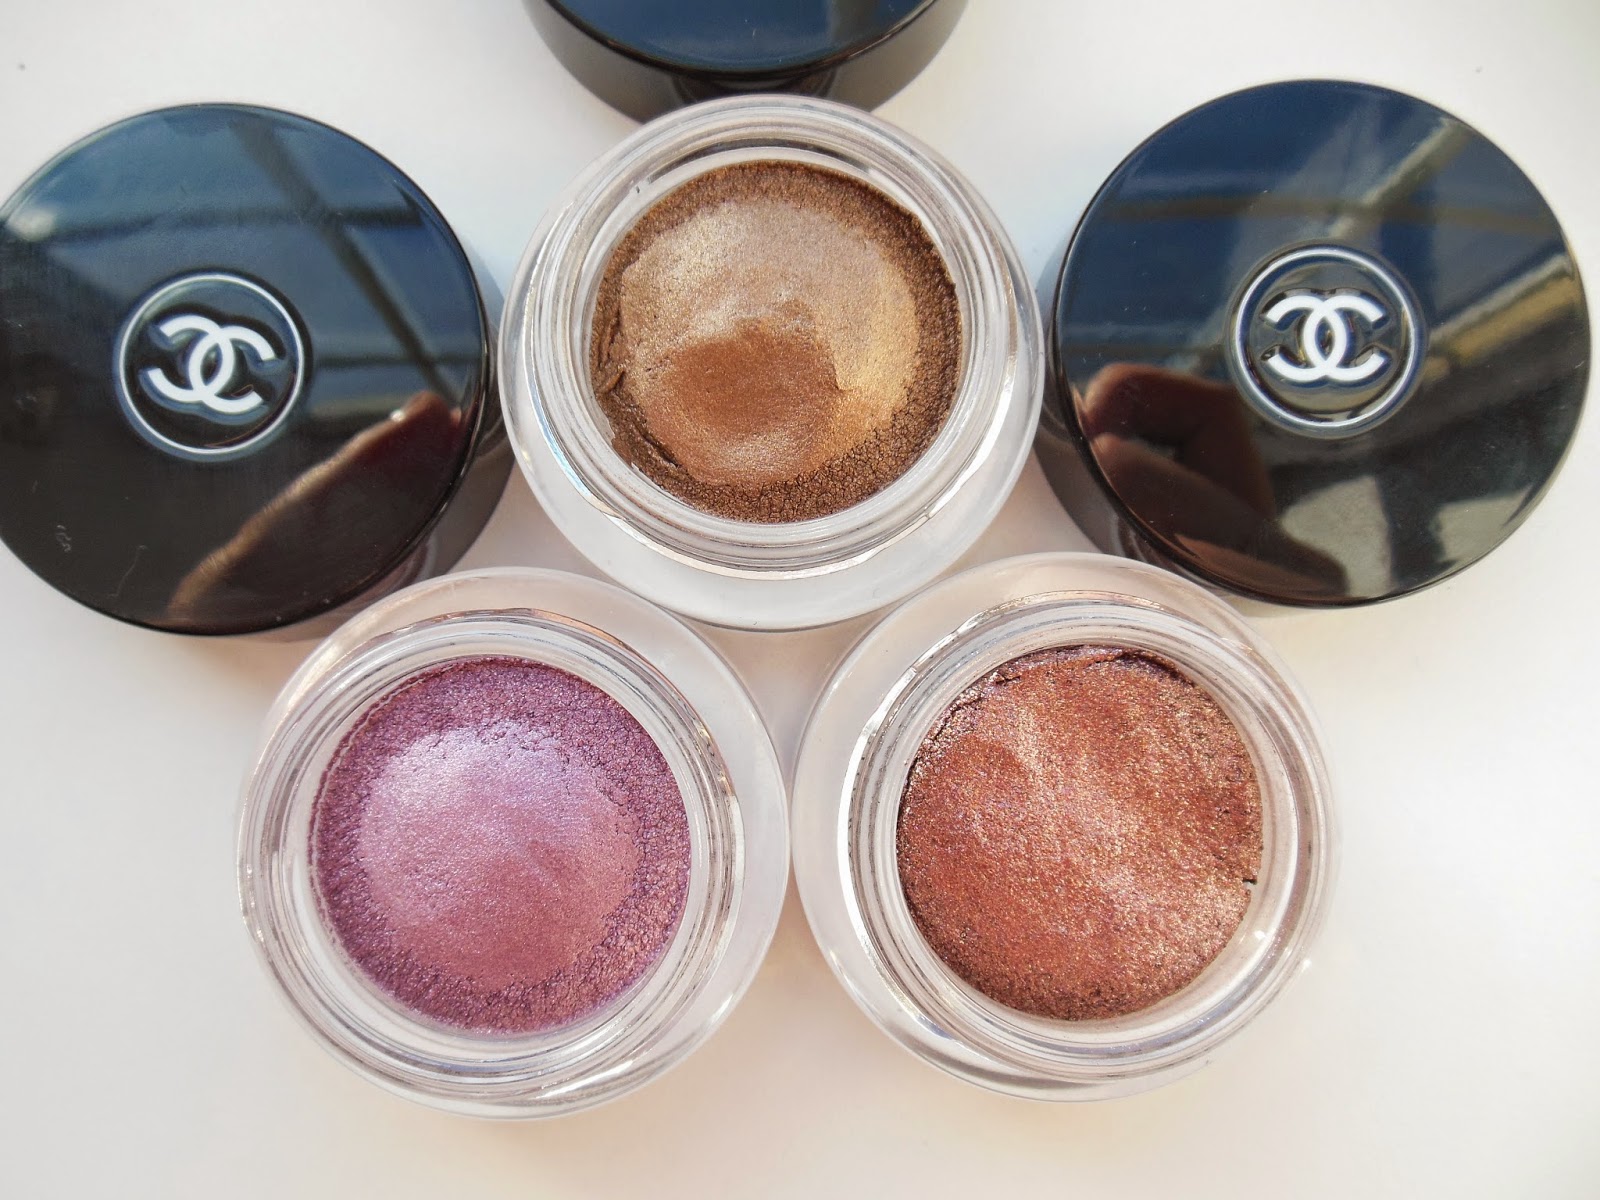 New In - Chanel Illusion D'Ombre in New Moon, Utopia and Mirage